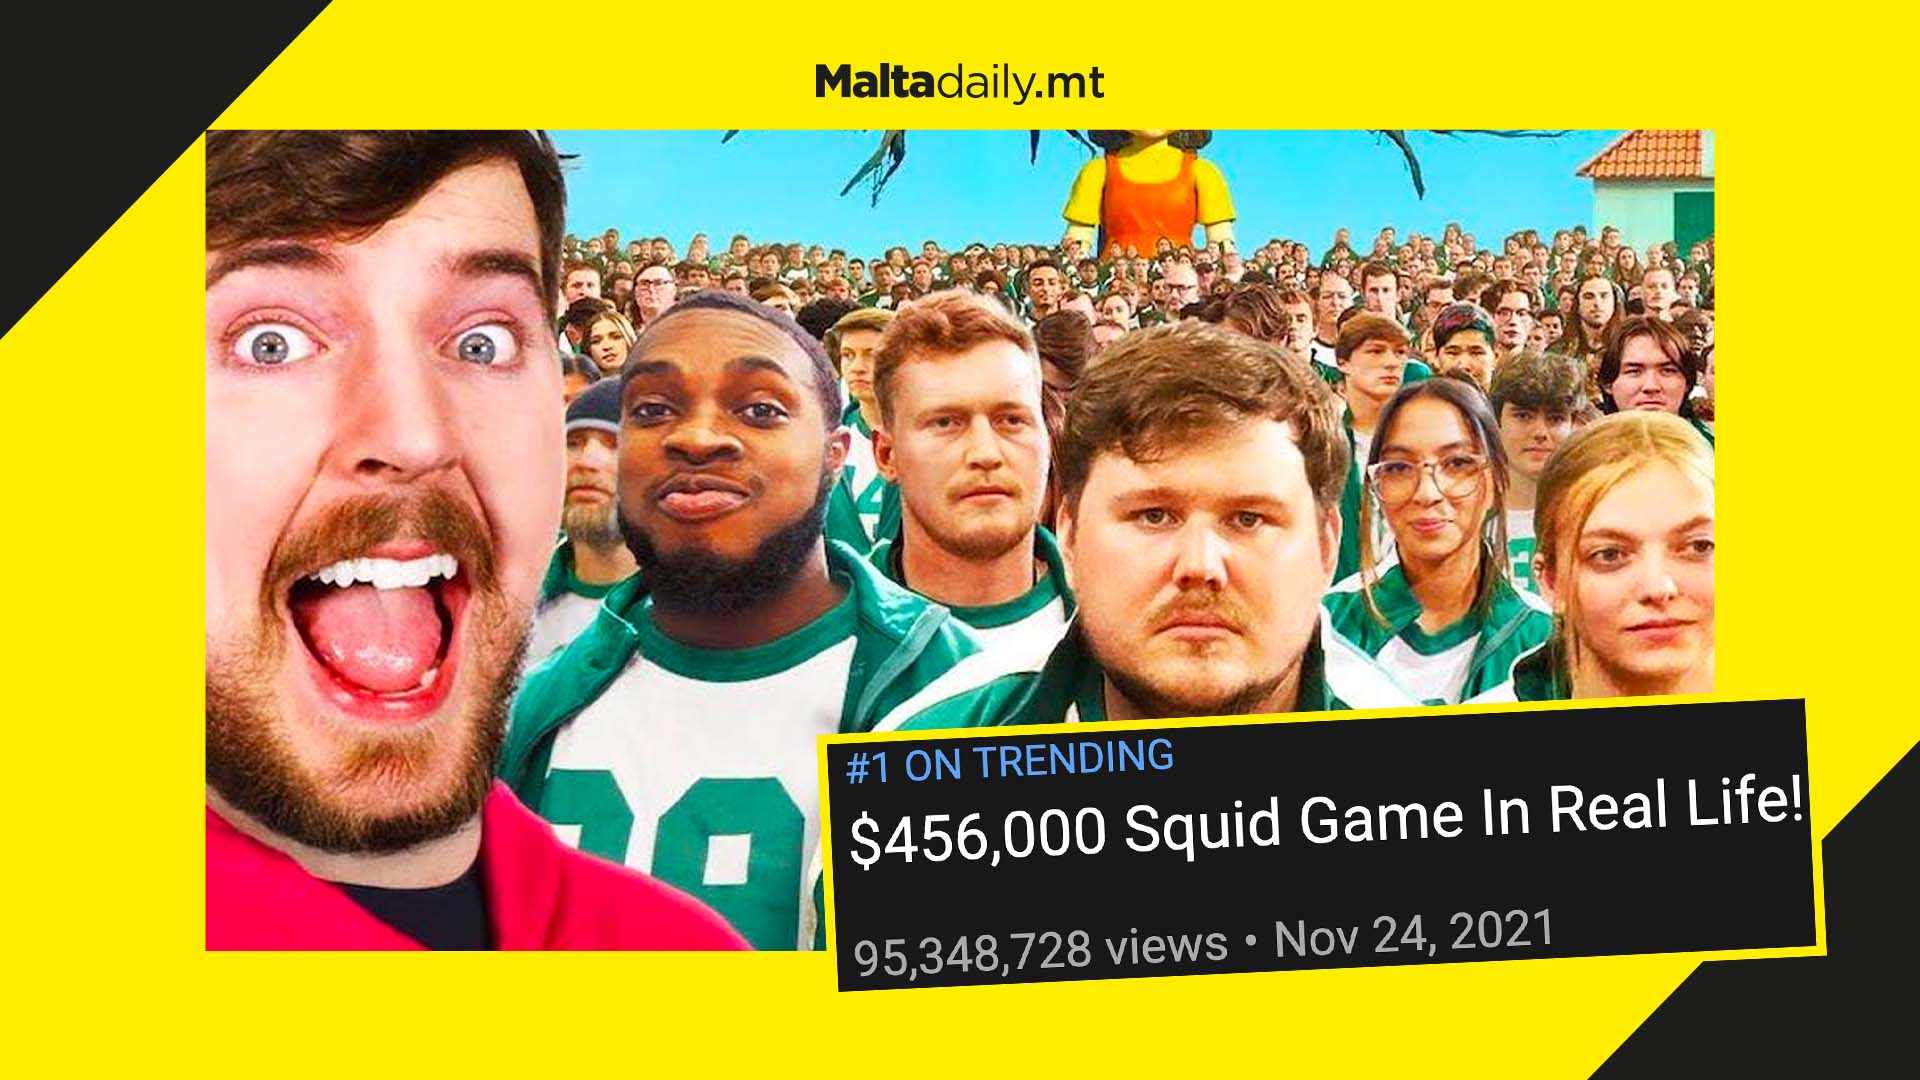 MrBeast held a real life Squid Game for $456,000 and the internet went wild